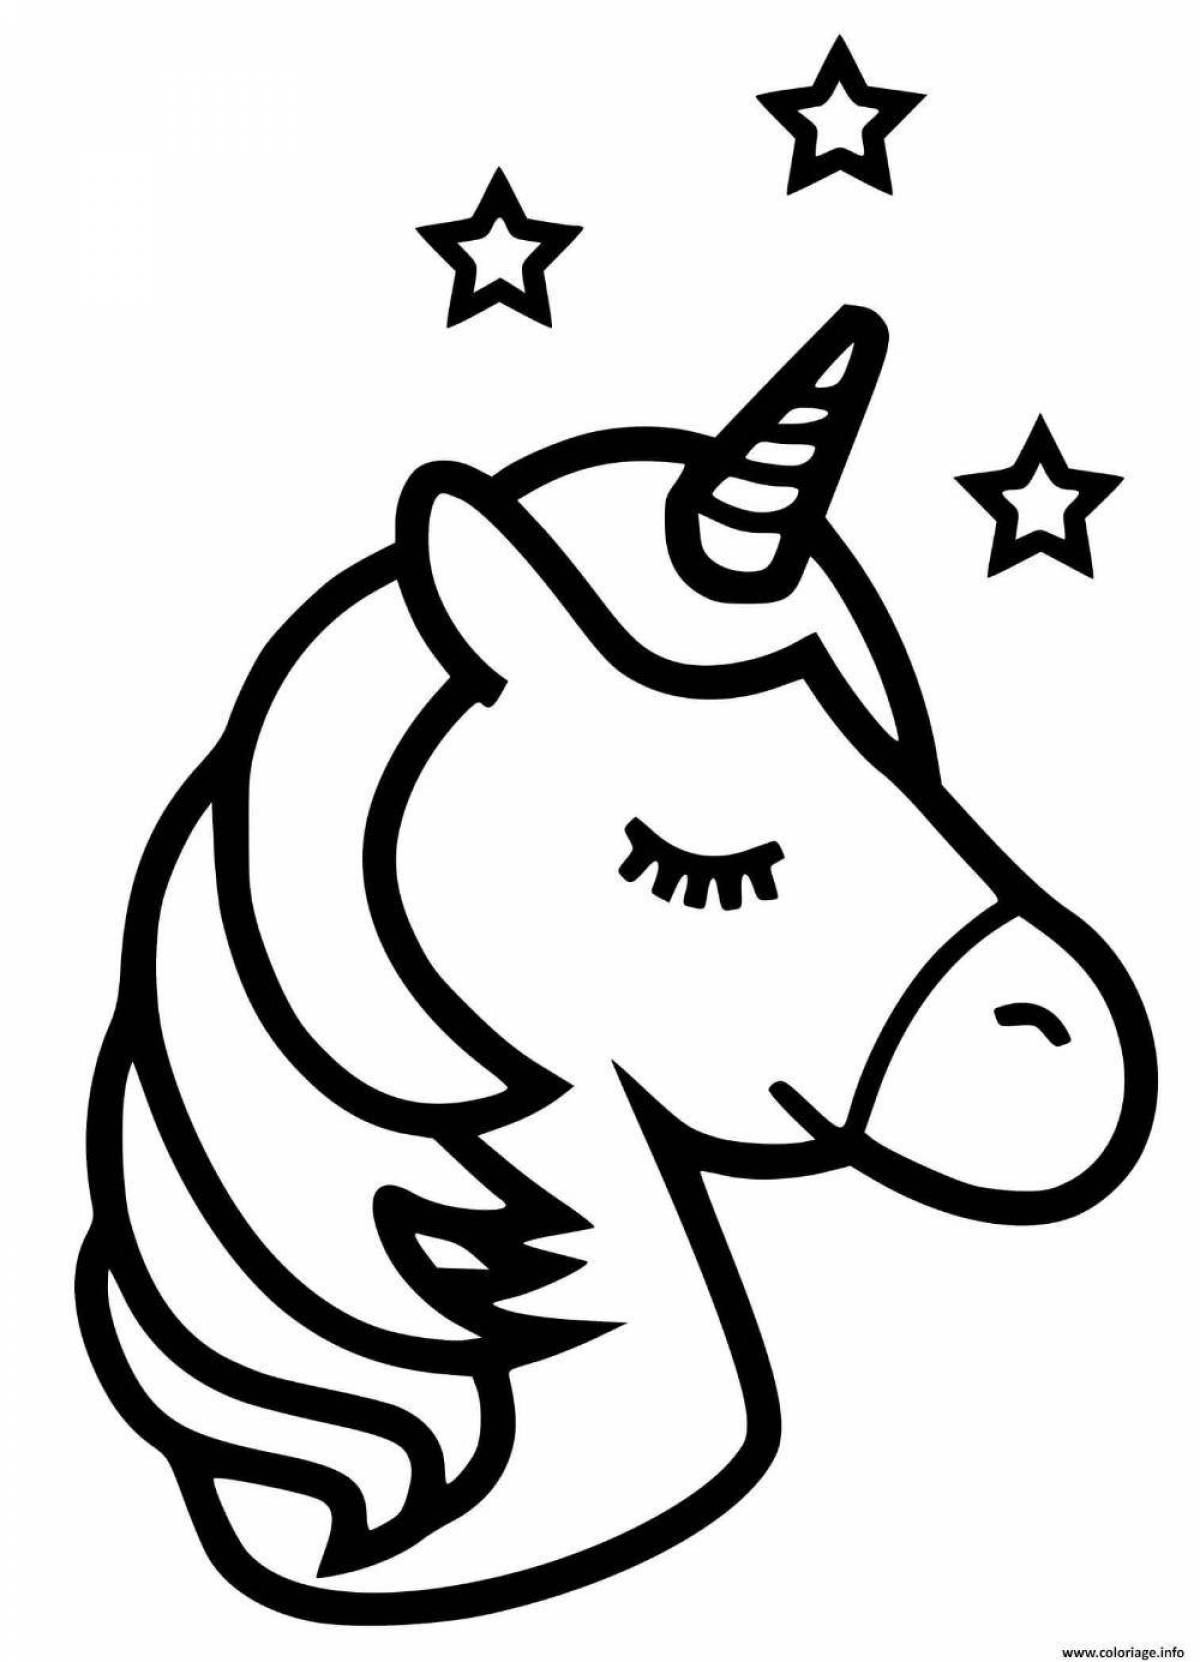 Dazzling coloring how to draw a unicorn